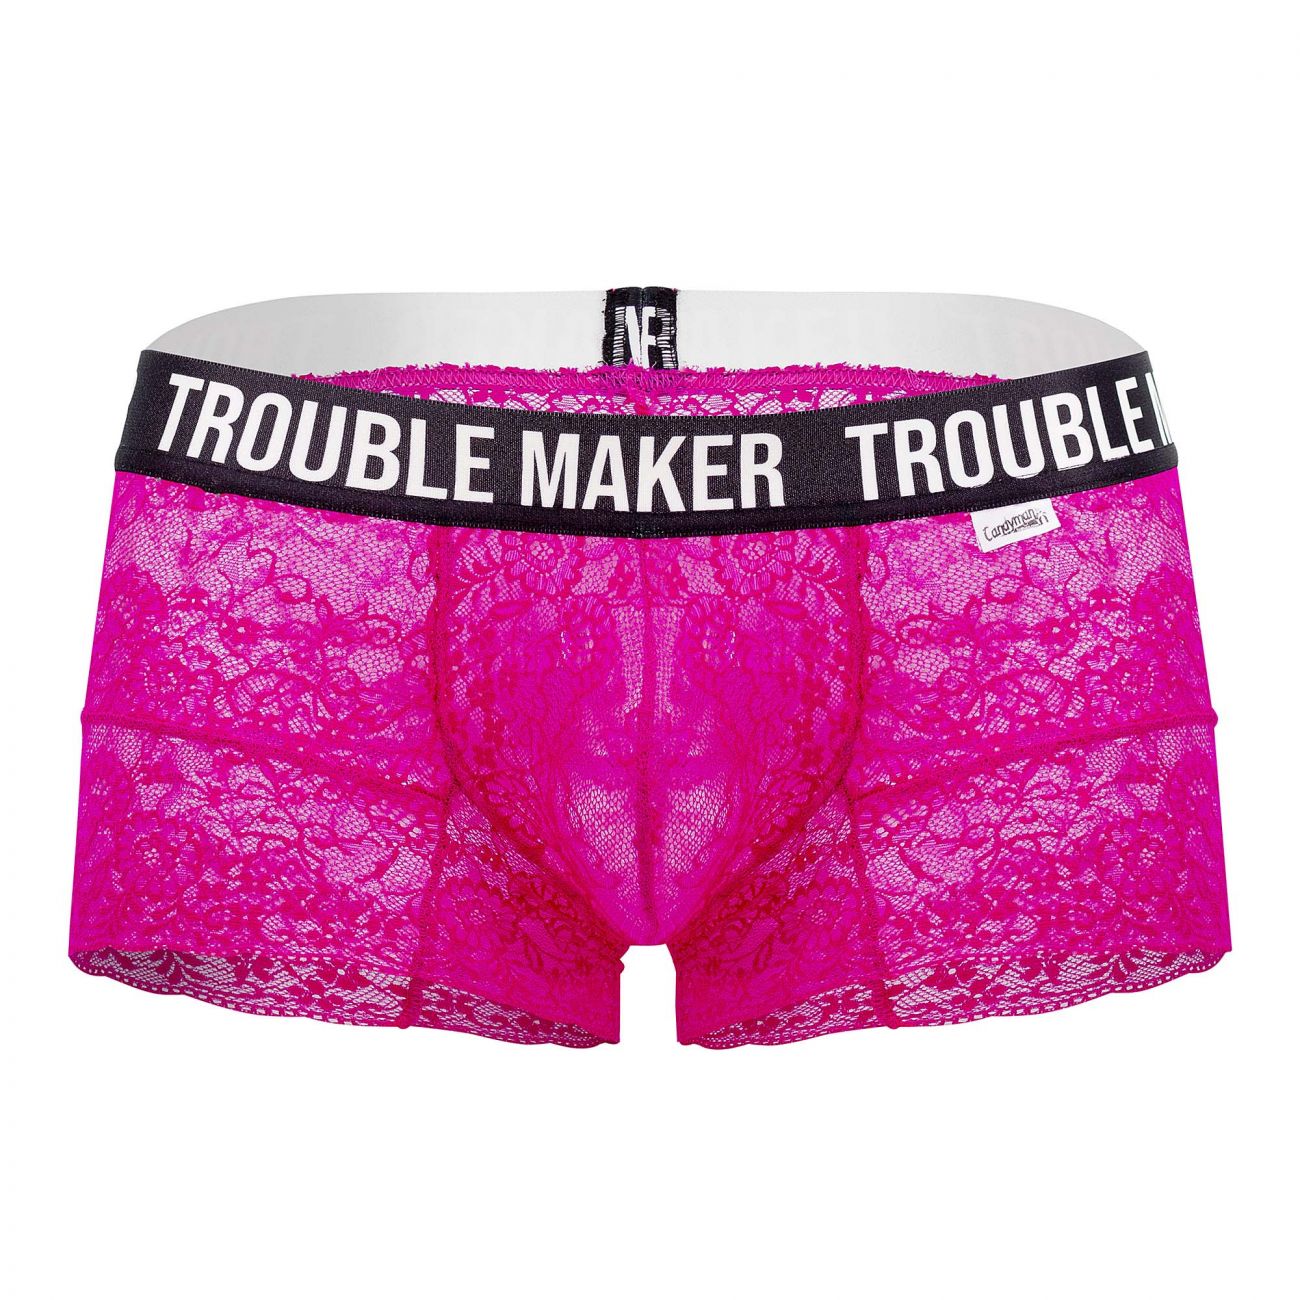 CandyMan 99616X Trouble Maker Lace Trunks Pink Plus Sizes